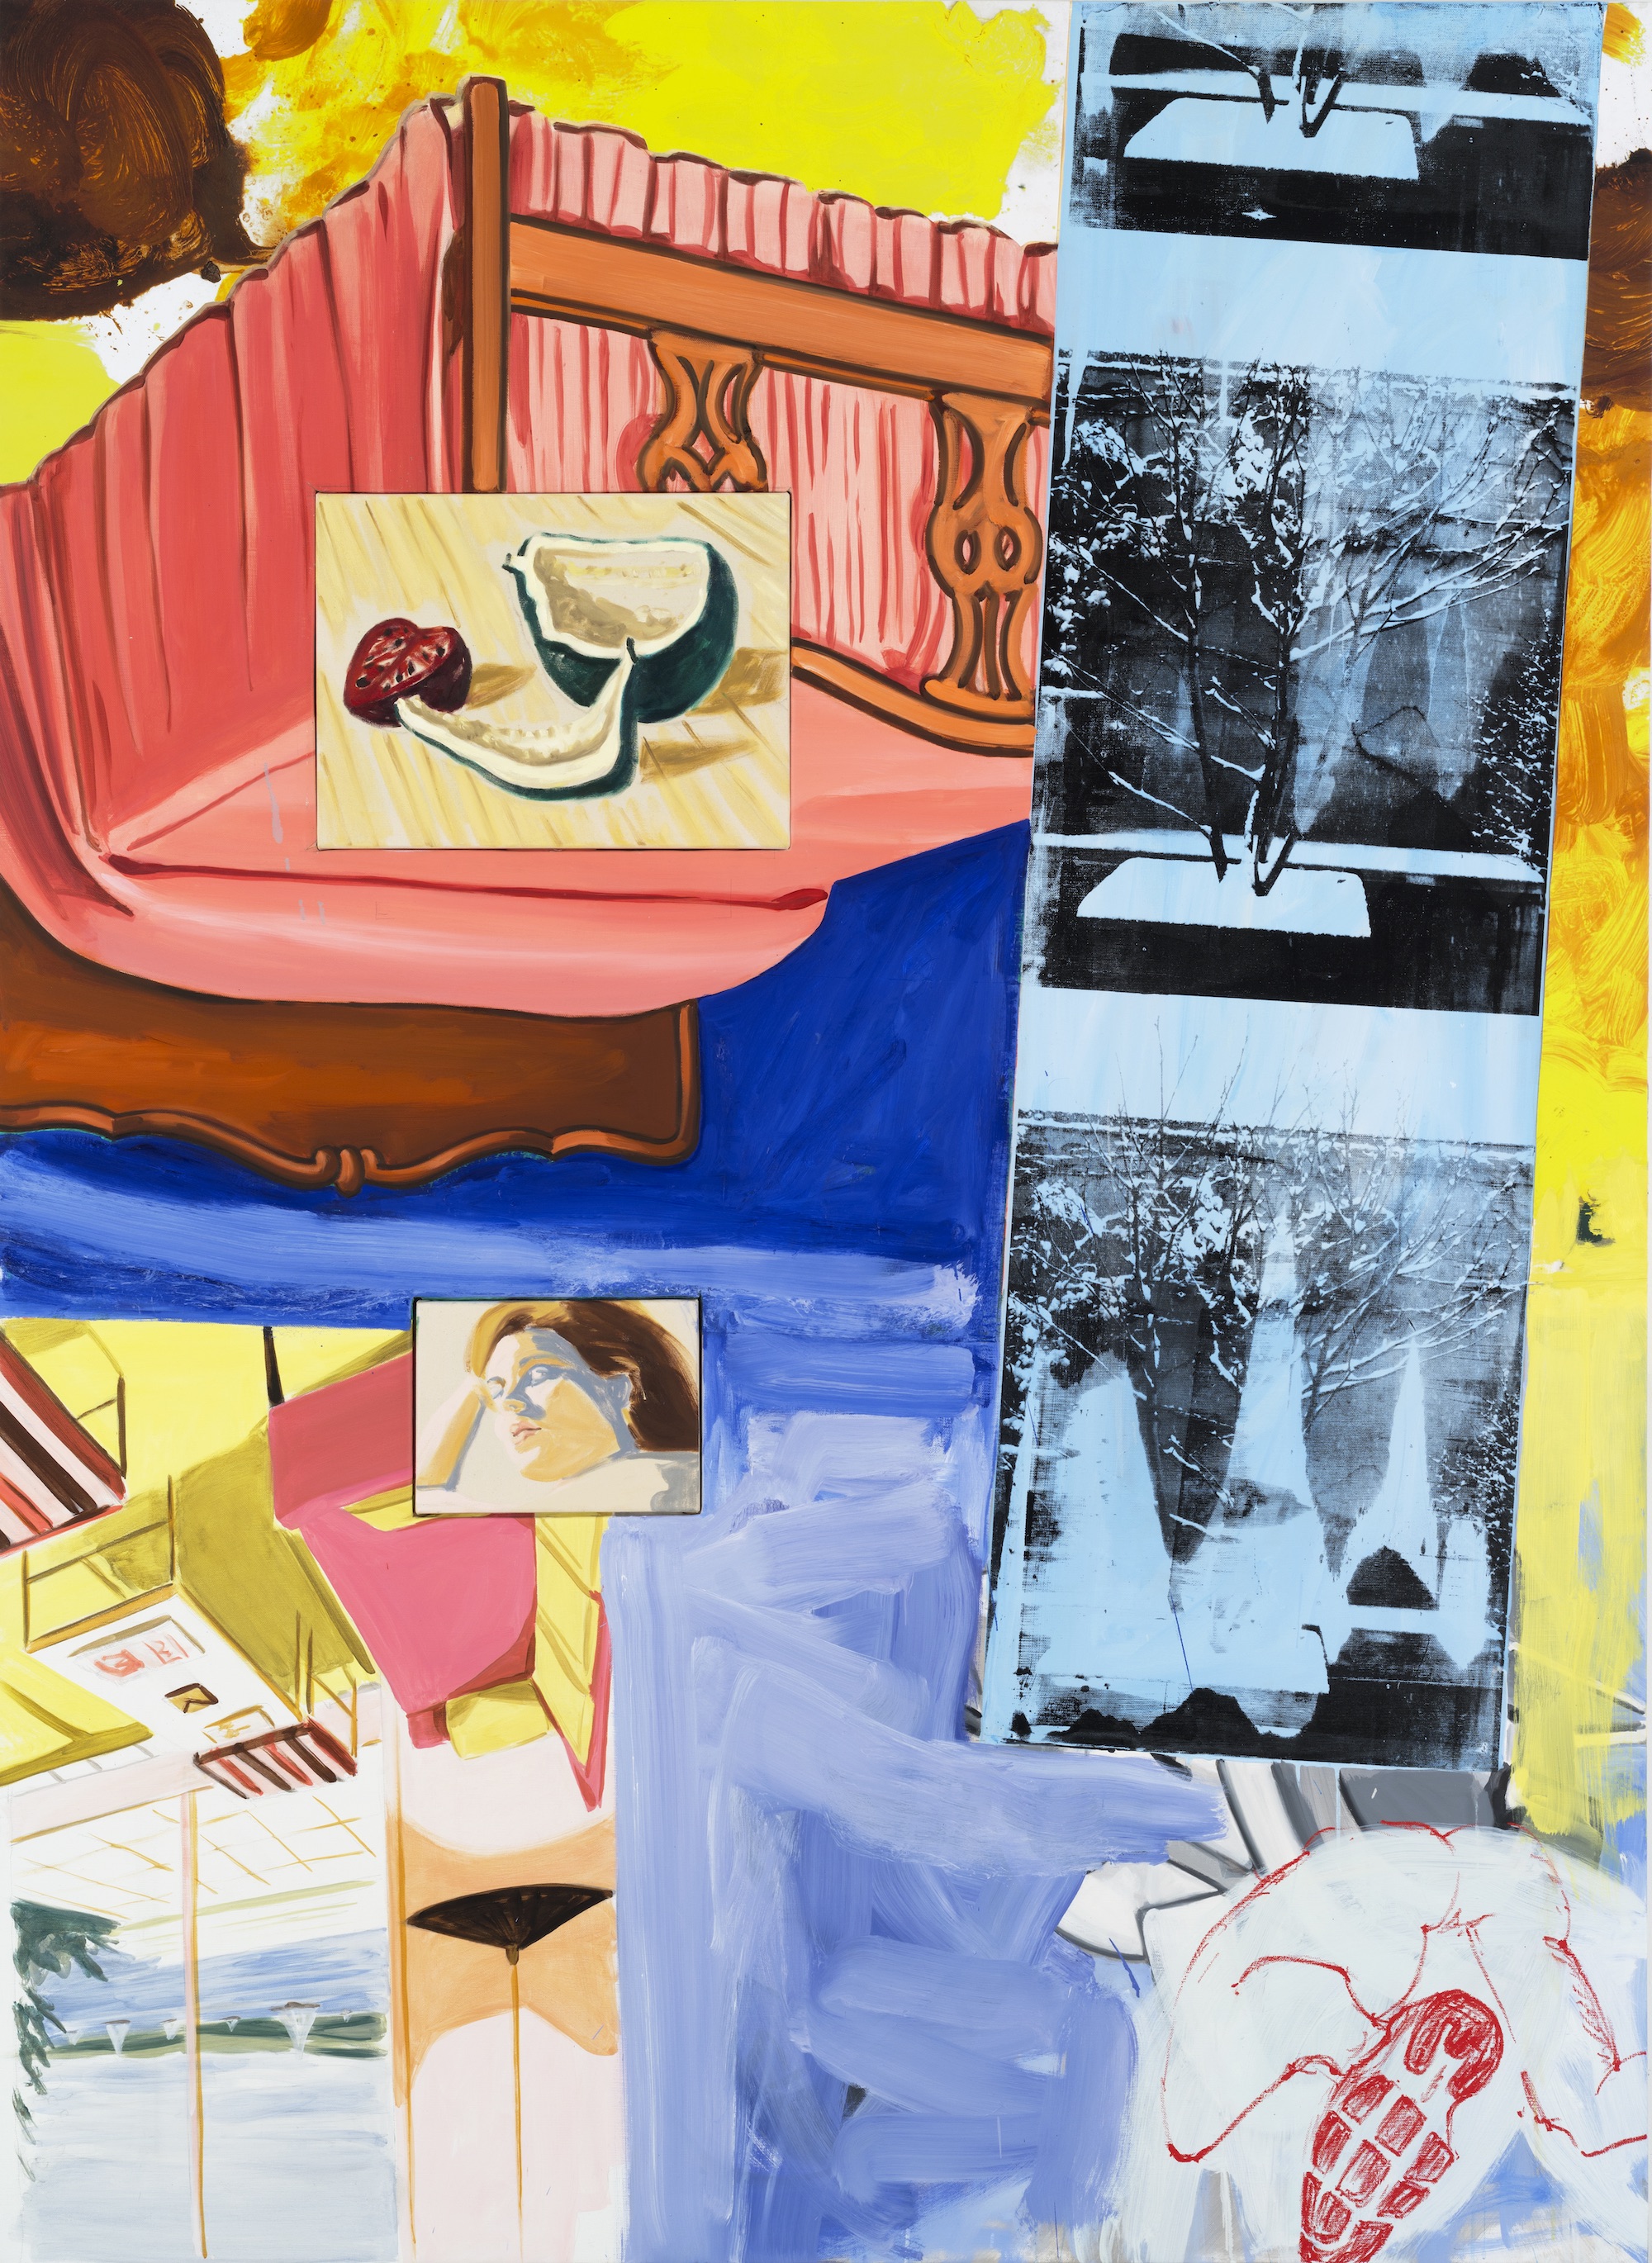 David Salle, Falling Into Bed, 2014.